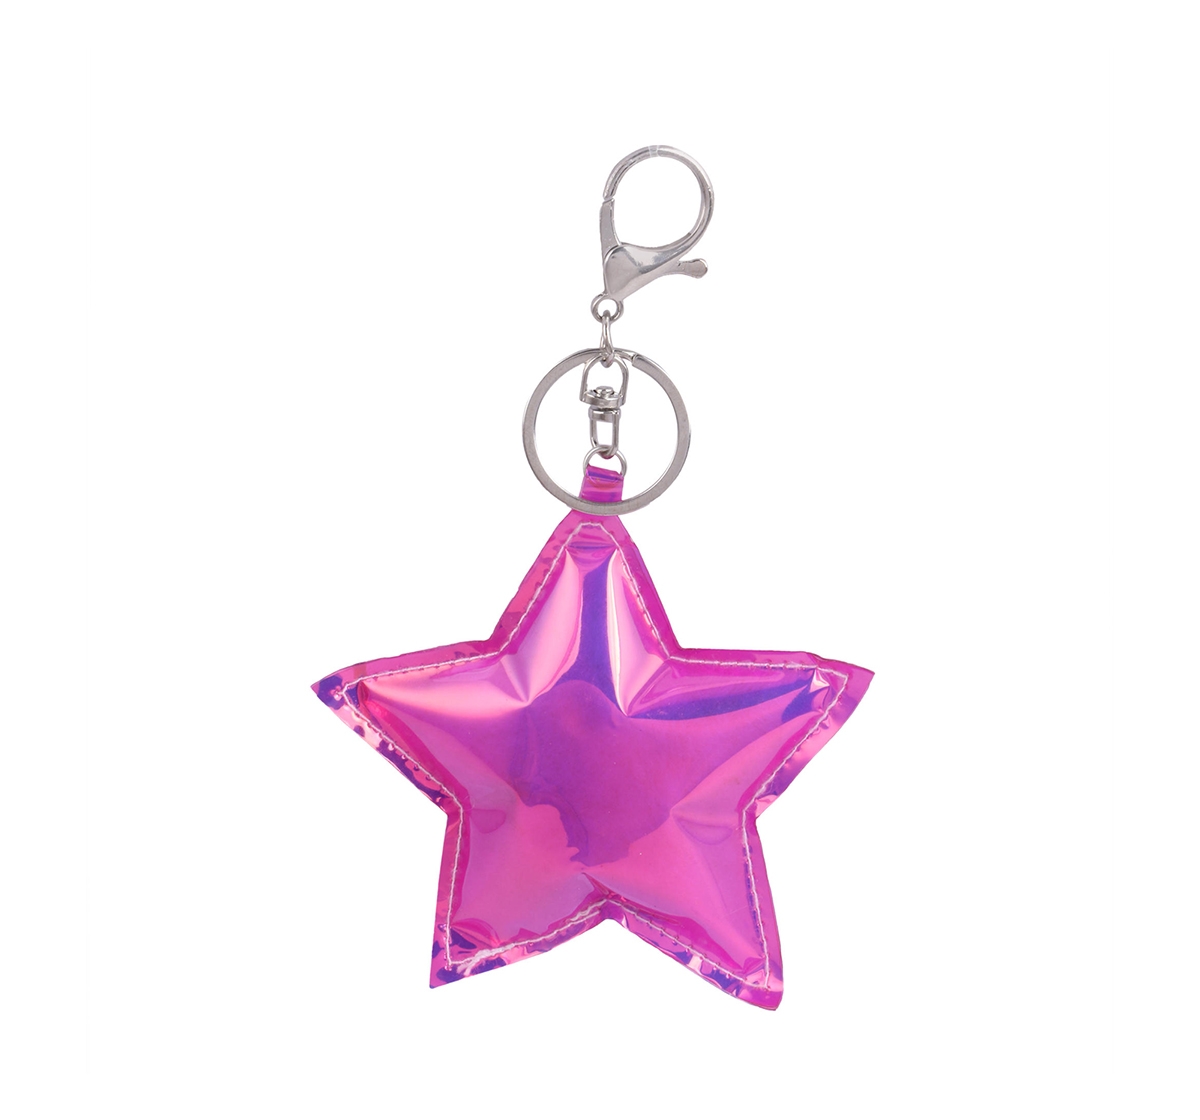 Hamster London Star Keychain for Girls age 3Y+ (Pink)